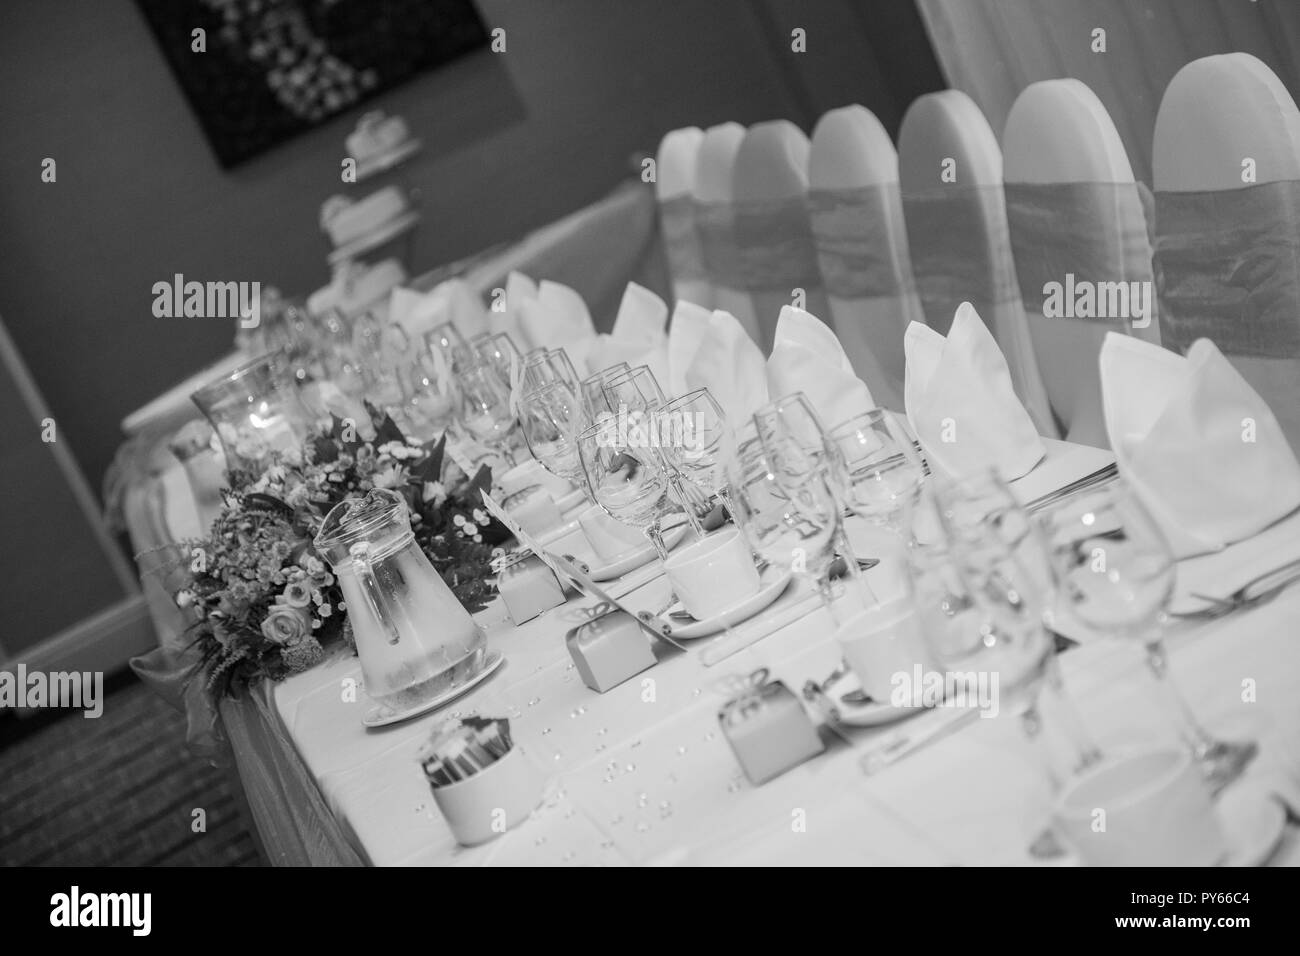 Table decorations on a wedding day ready for the wedding breakfast Stock Photo